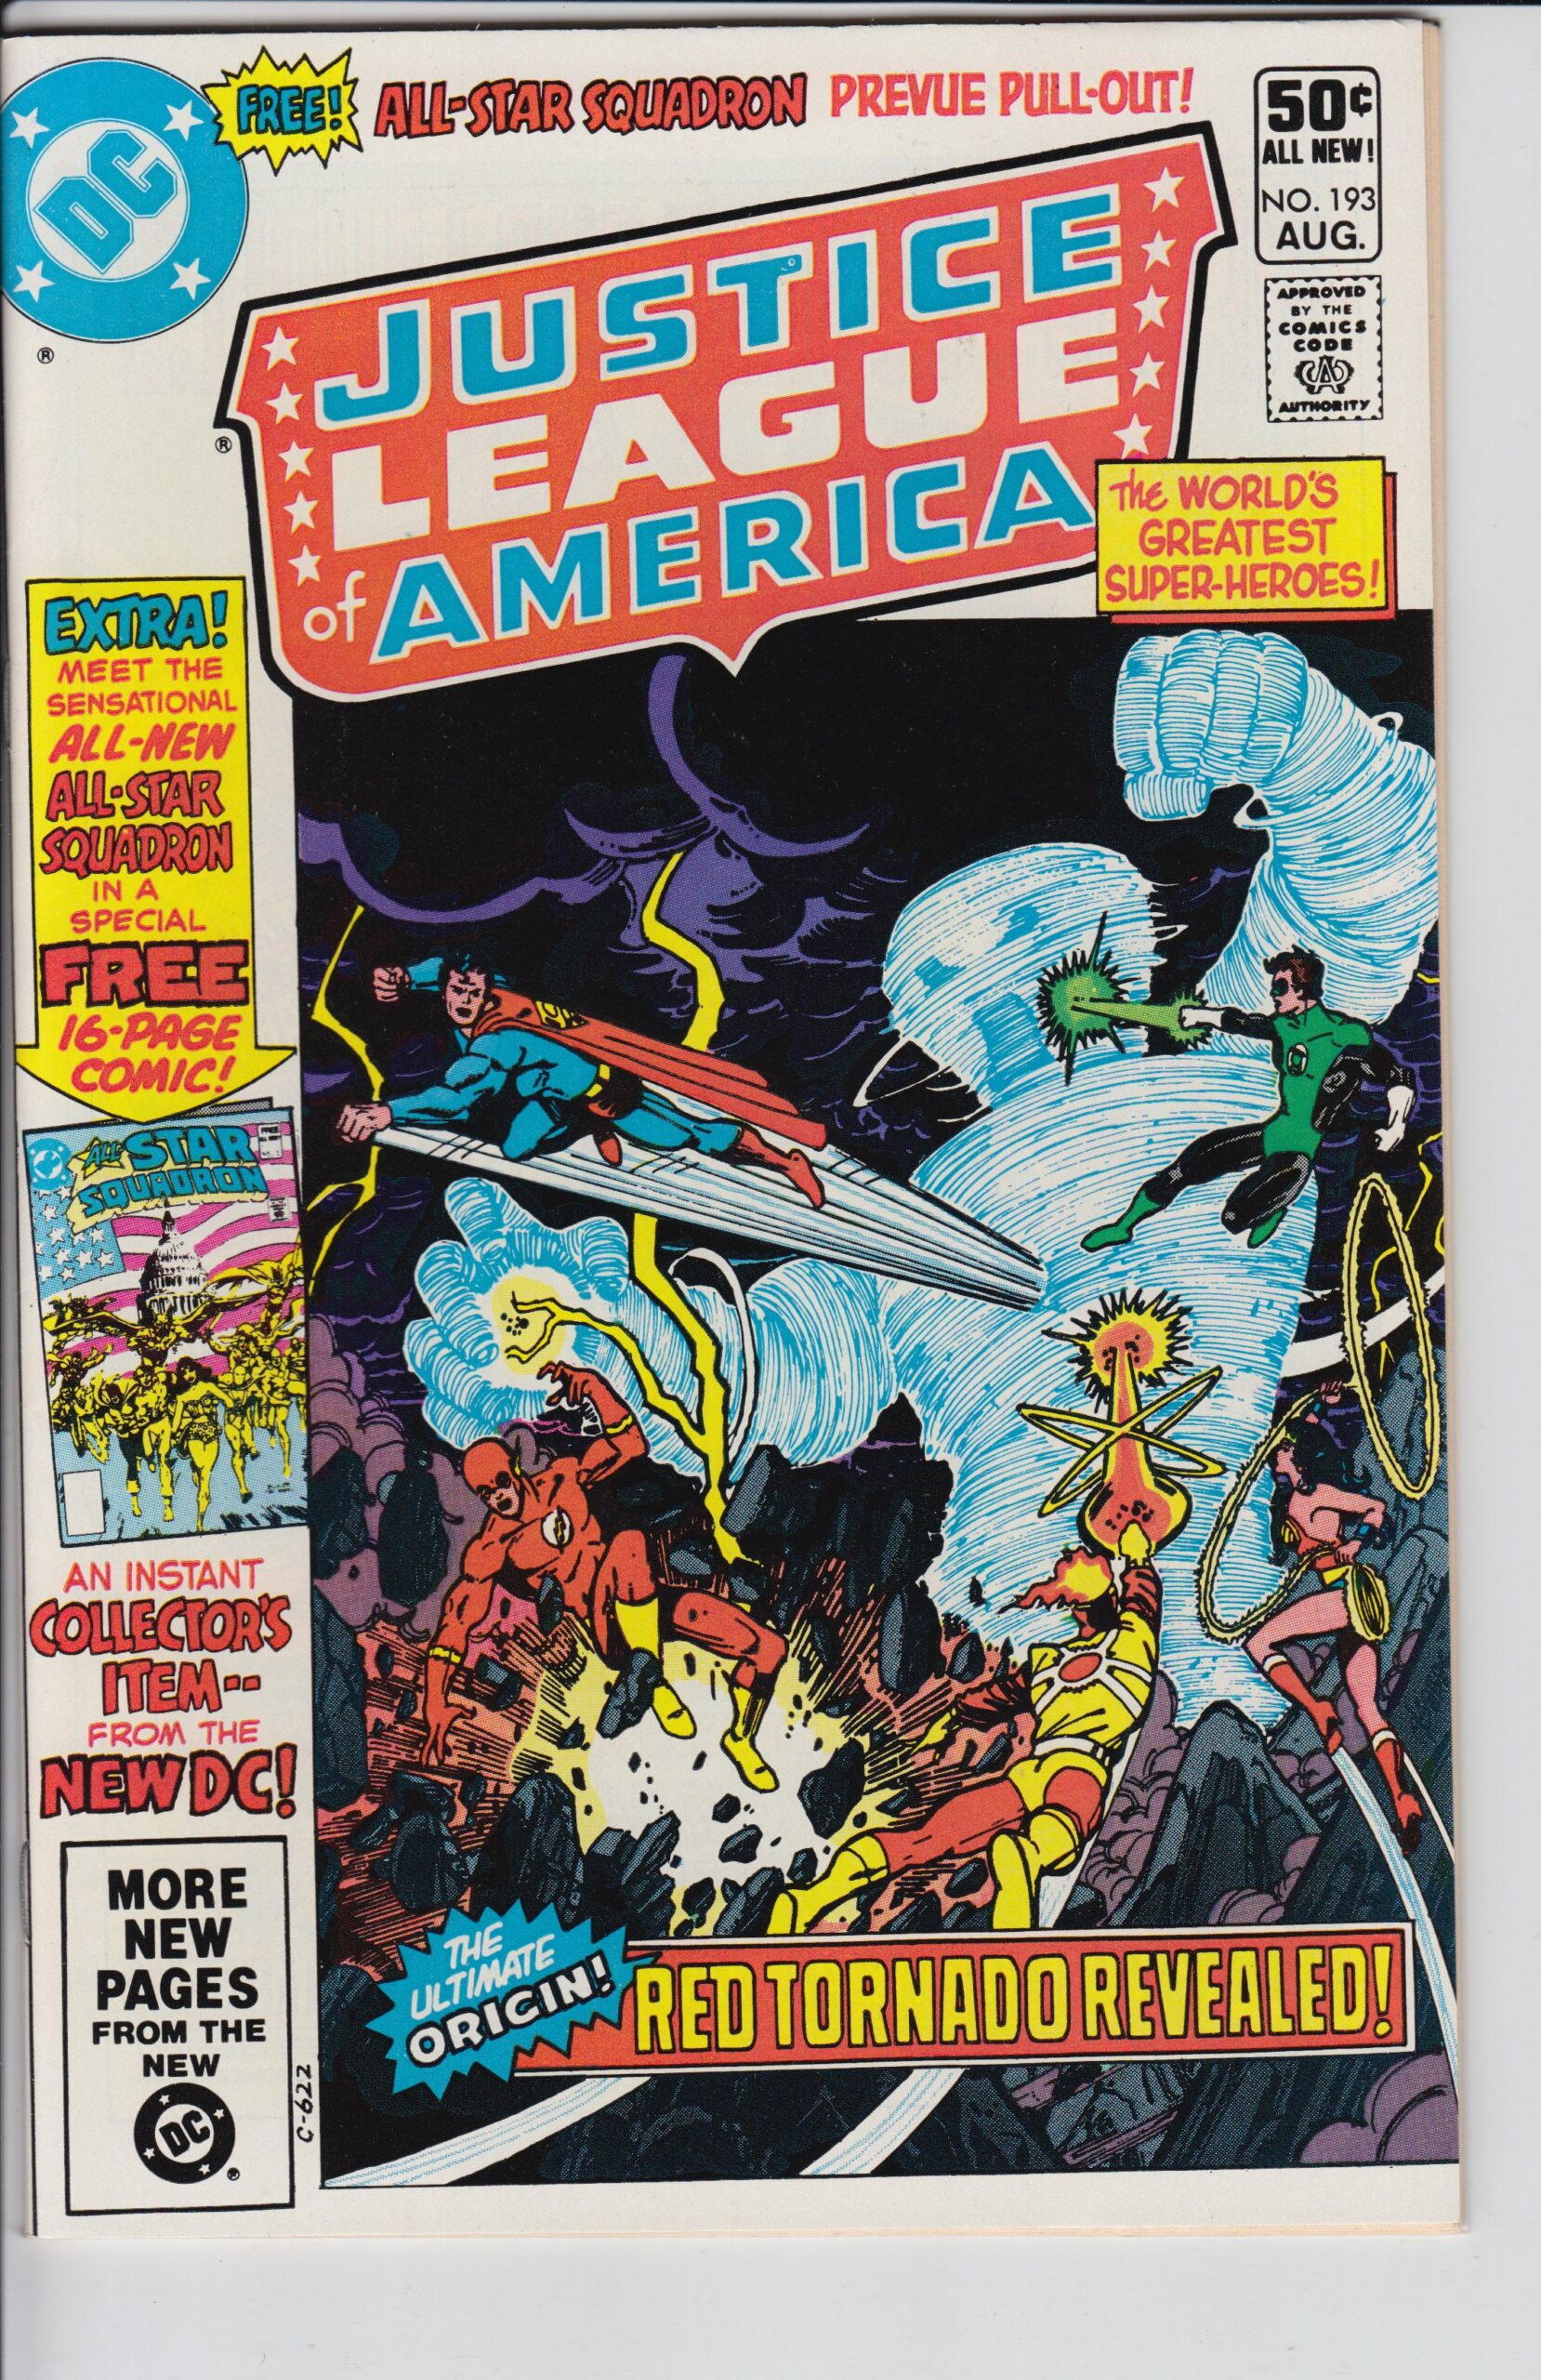 JUSTICE LEAGUE OF AMERICA #193 (1981) NM, white!